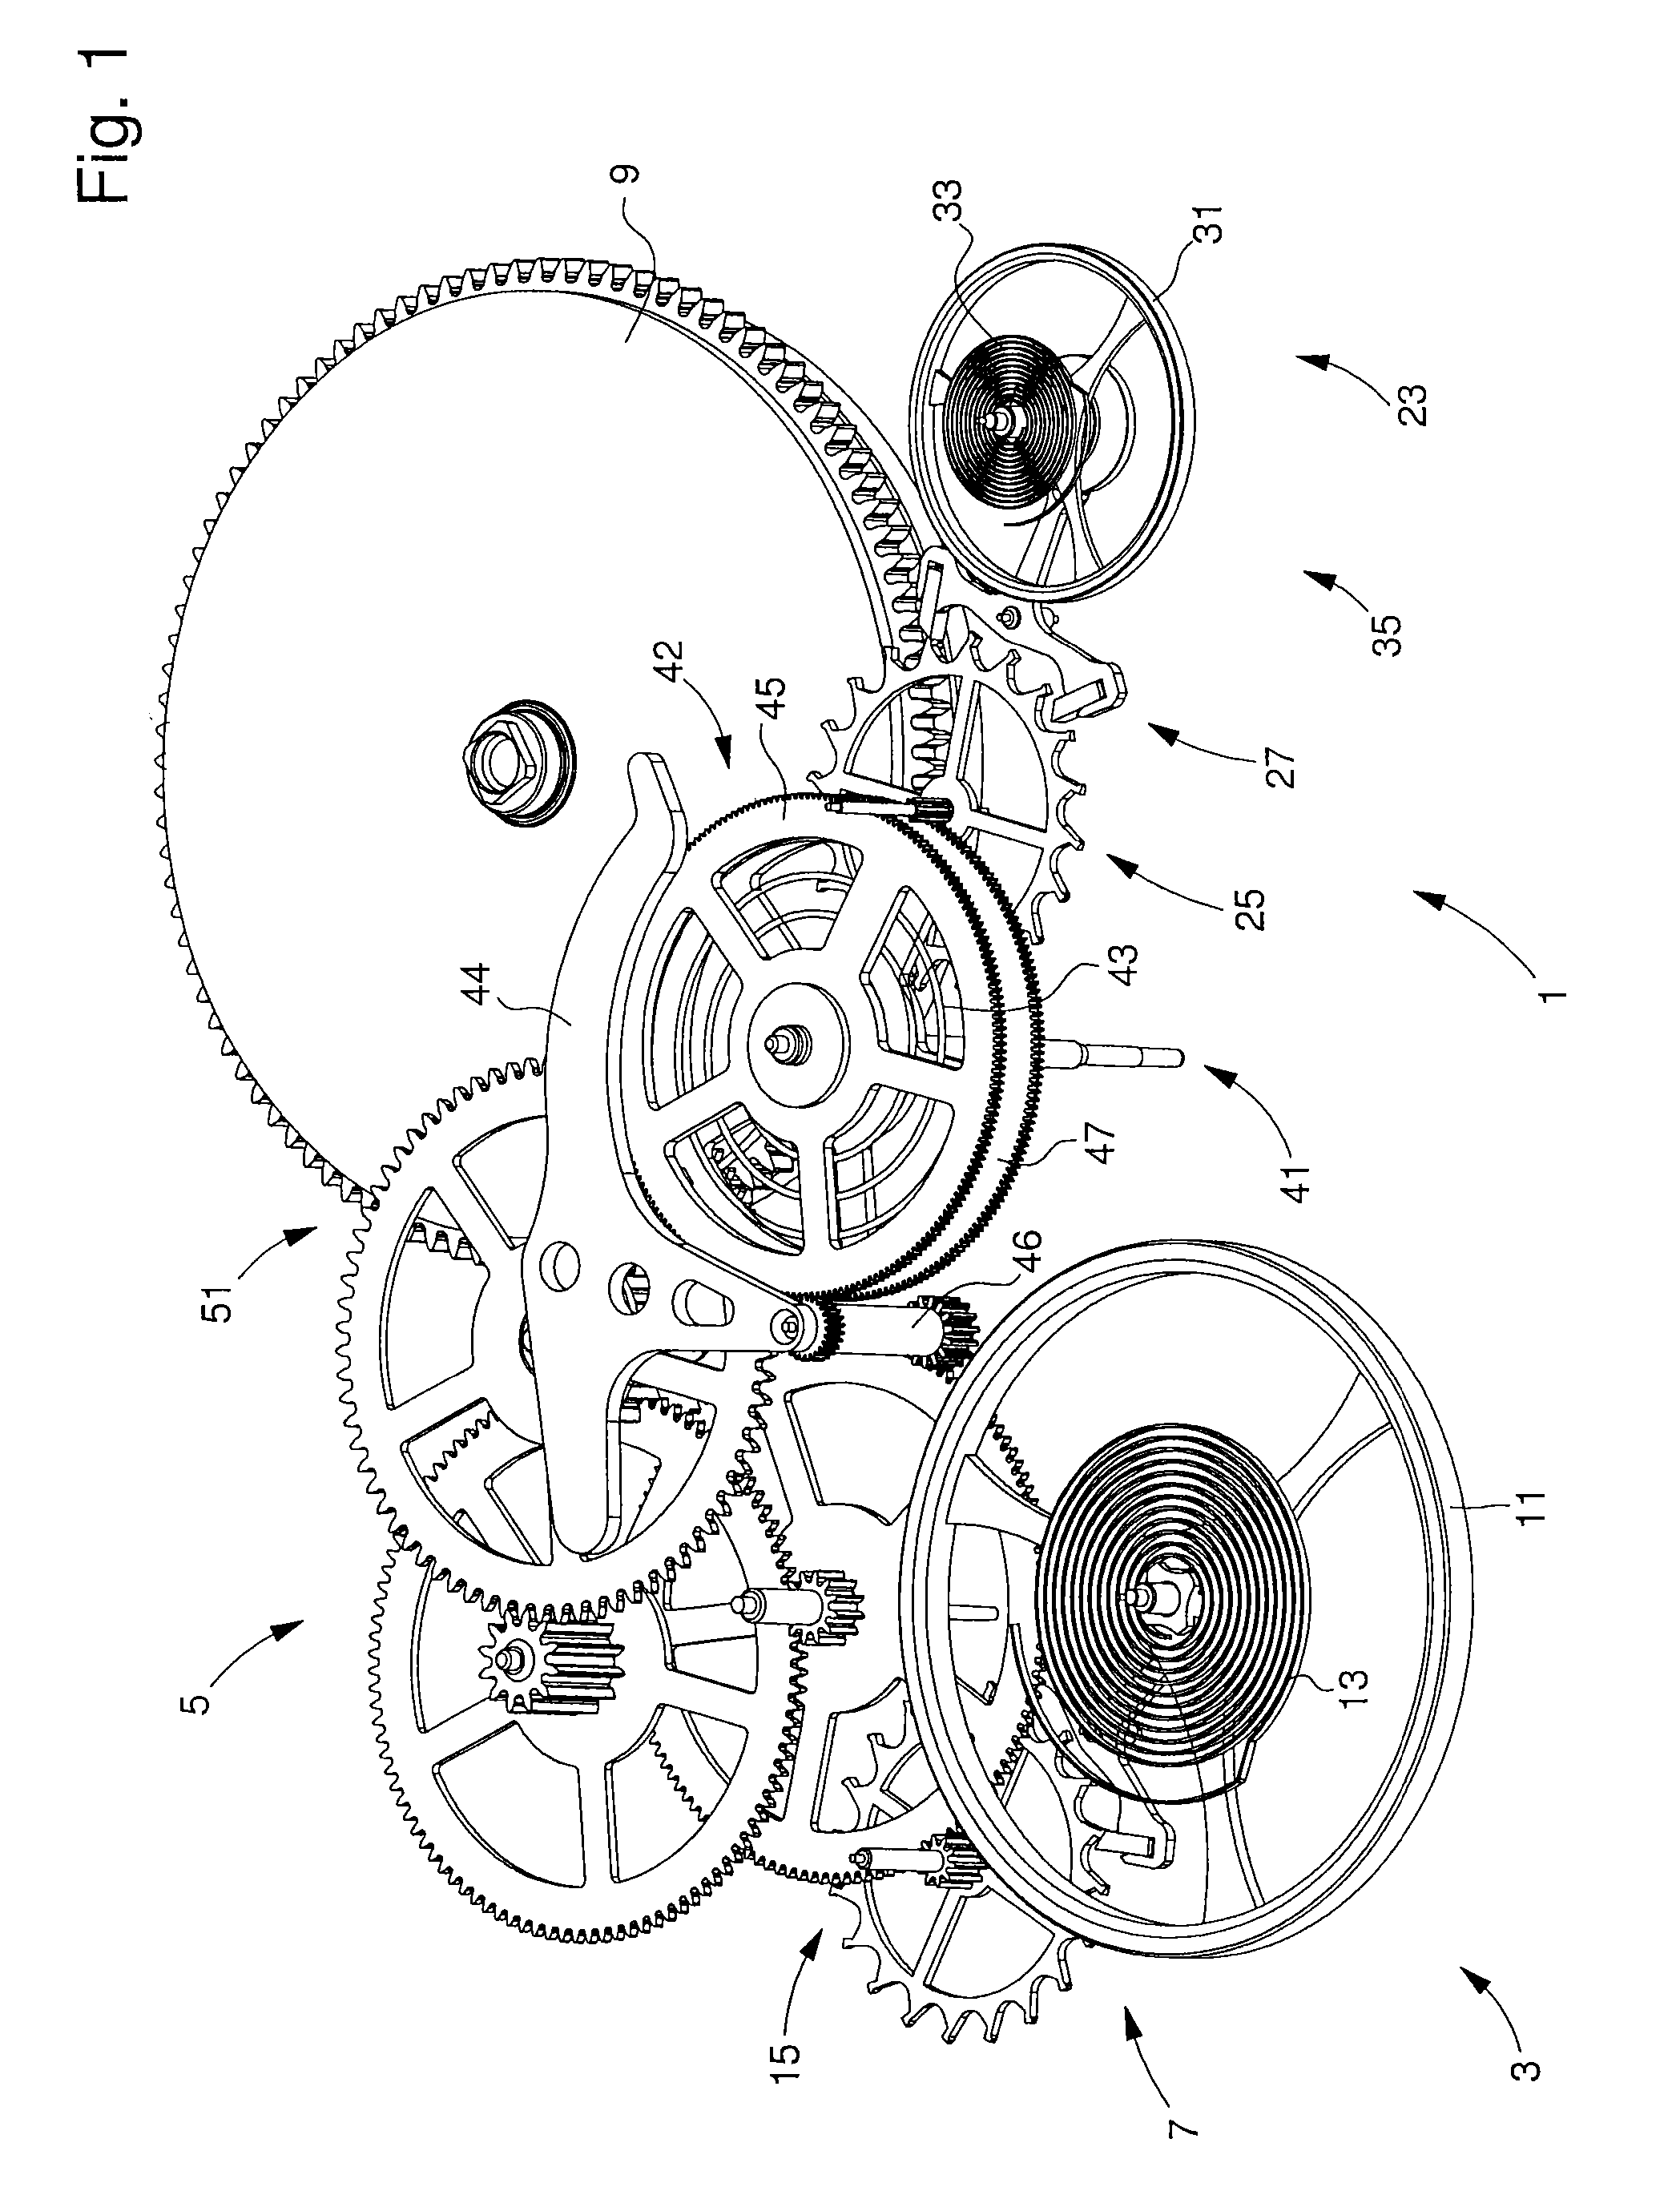 Timepiece with coupled oscillators in chronograph mode